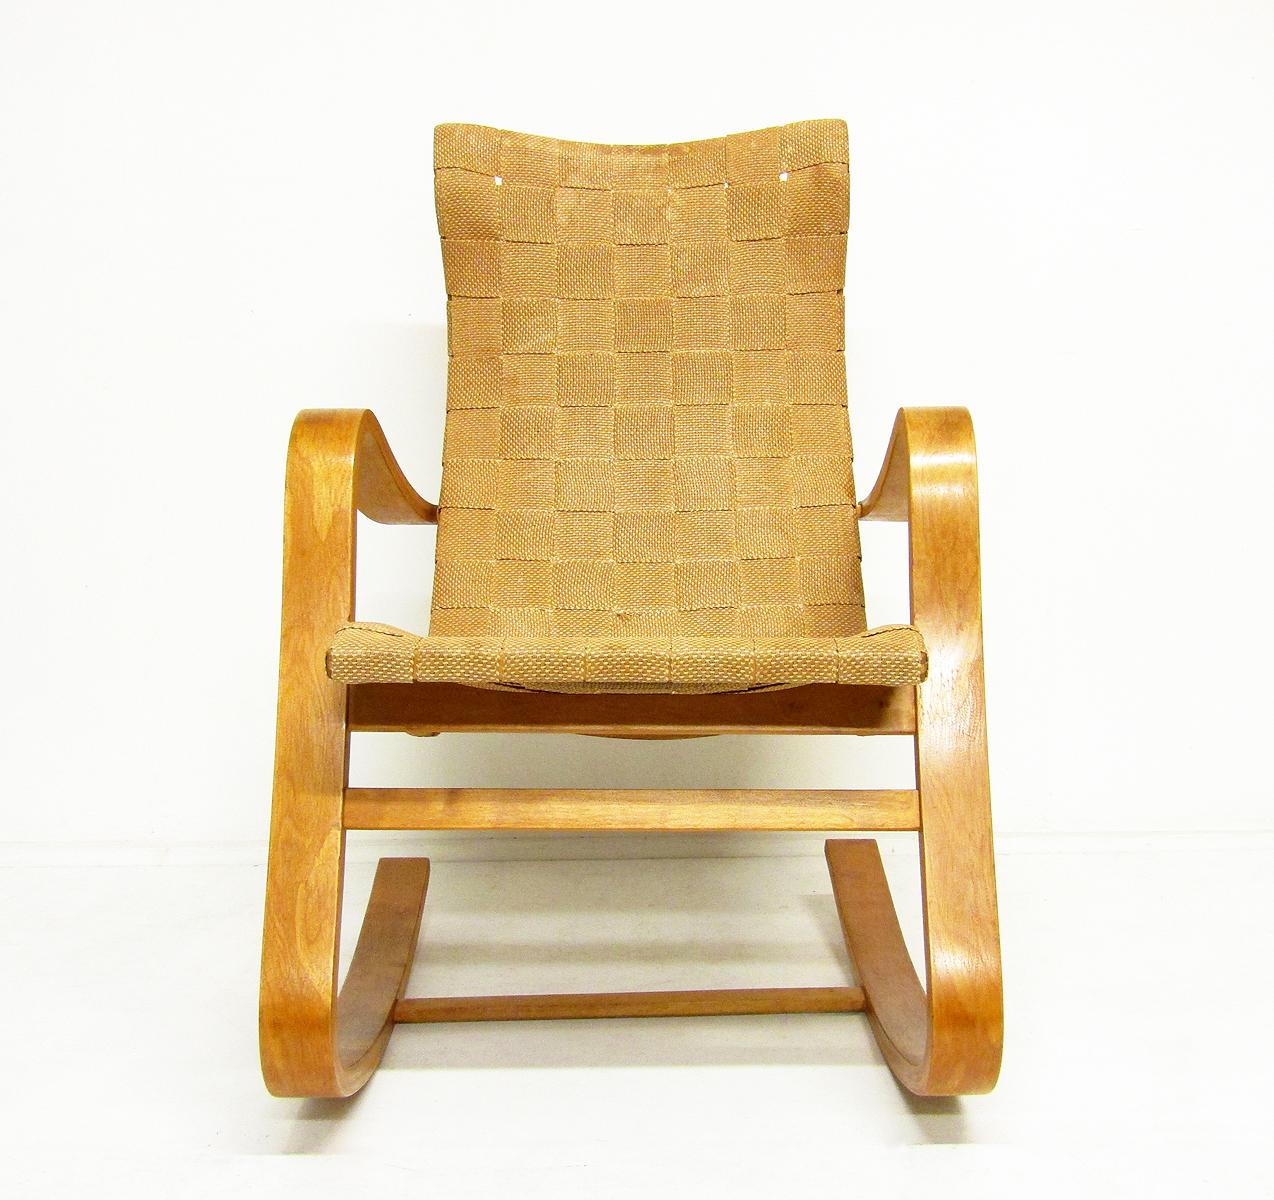 A particularly fine 1940s birch bentwood rocking chair by Swedish designer Gustaf Axel Berg.

An early importer of Alvar Aalto furniture, Gustaf Berg's own designs were influenced by the Finnish master. His organic works have received considerable